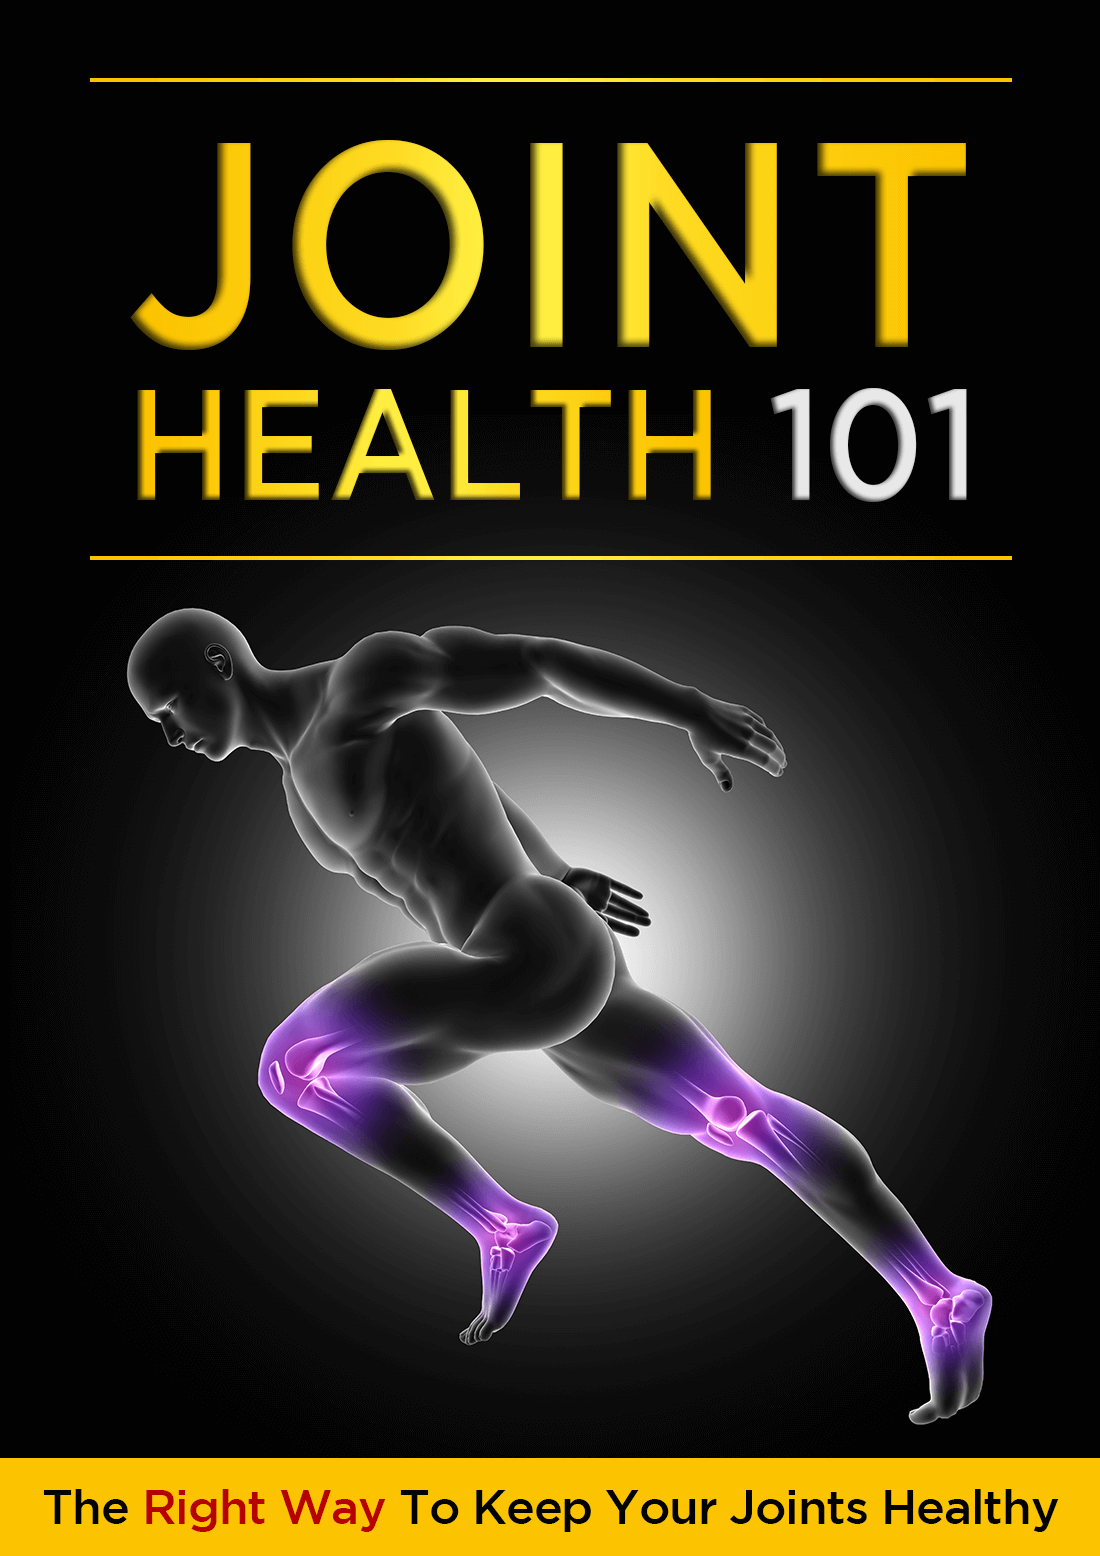 Joint Health 101 "A self-love journey"